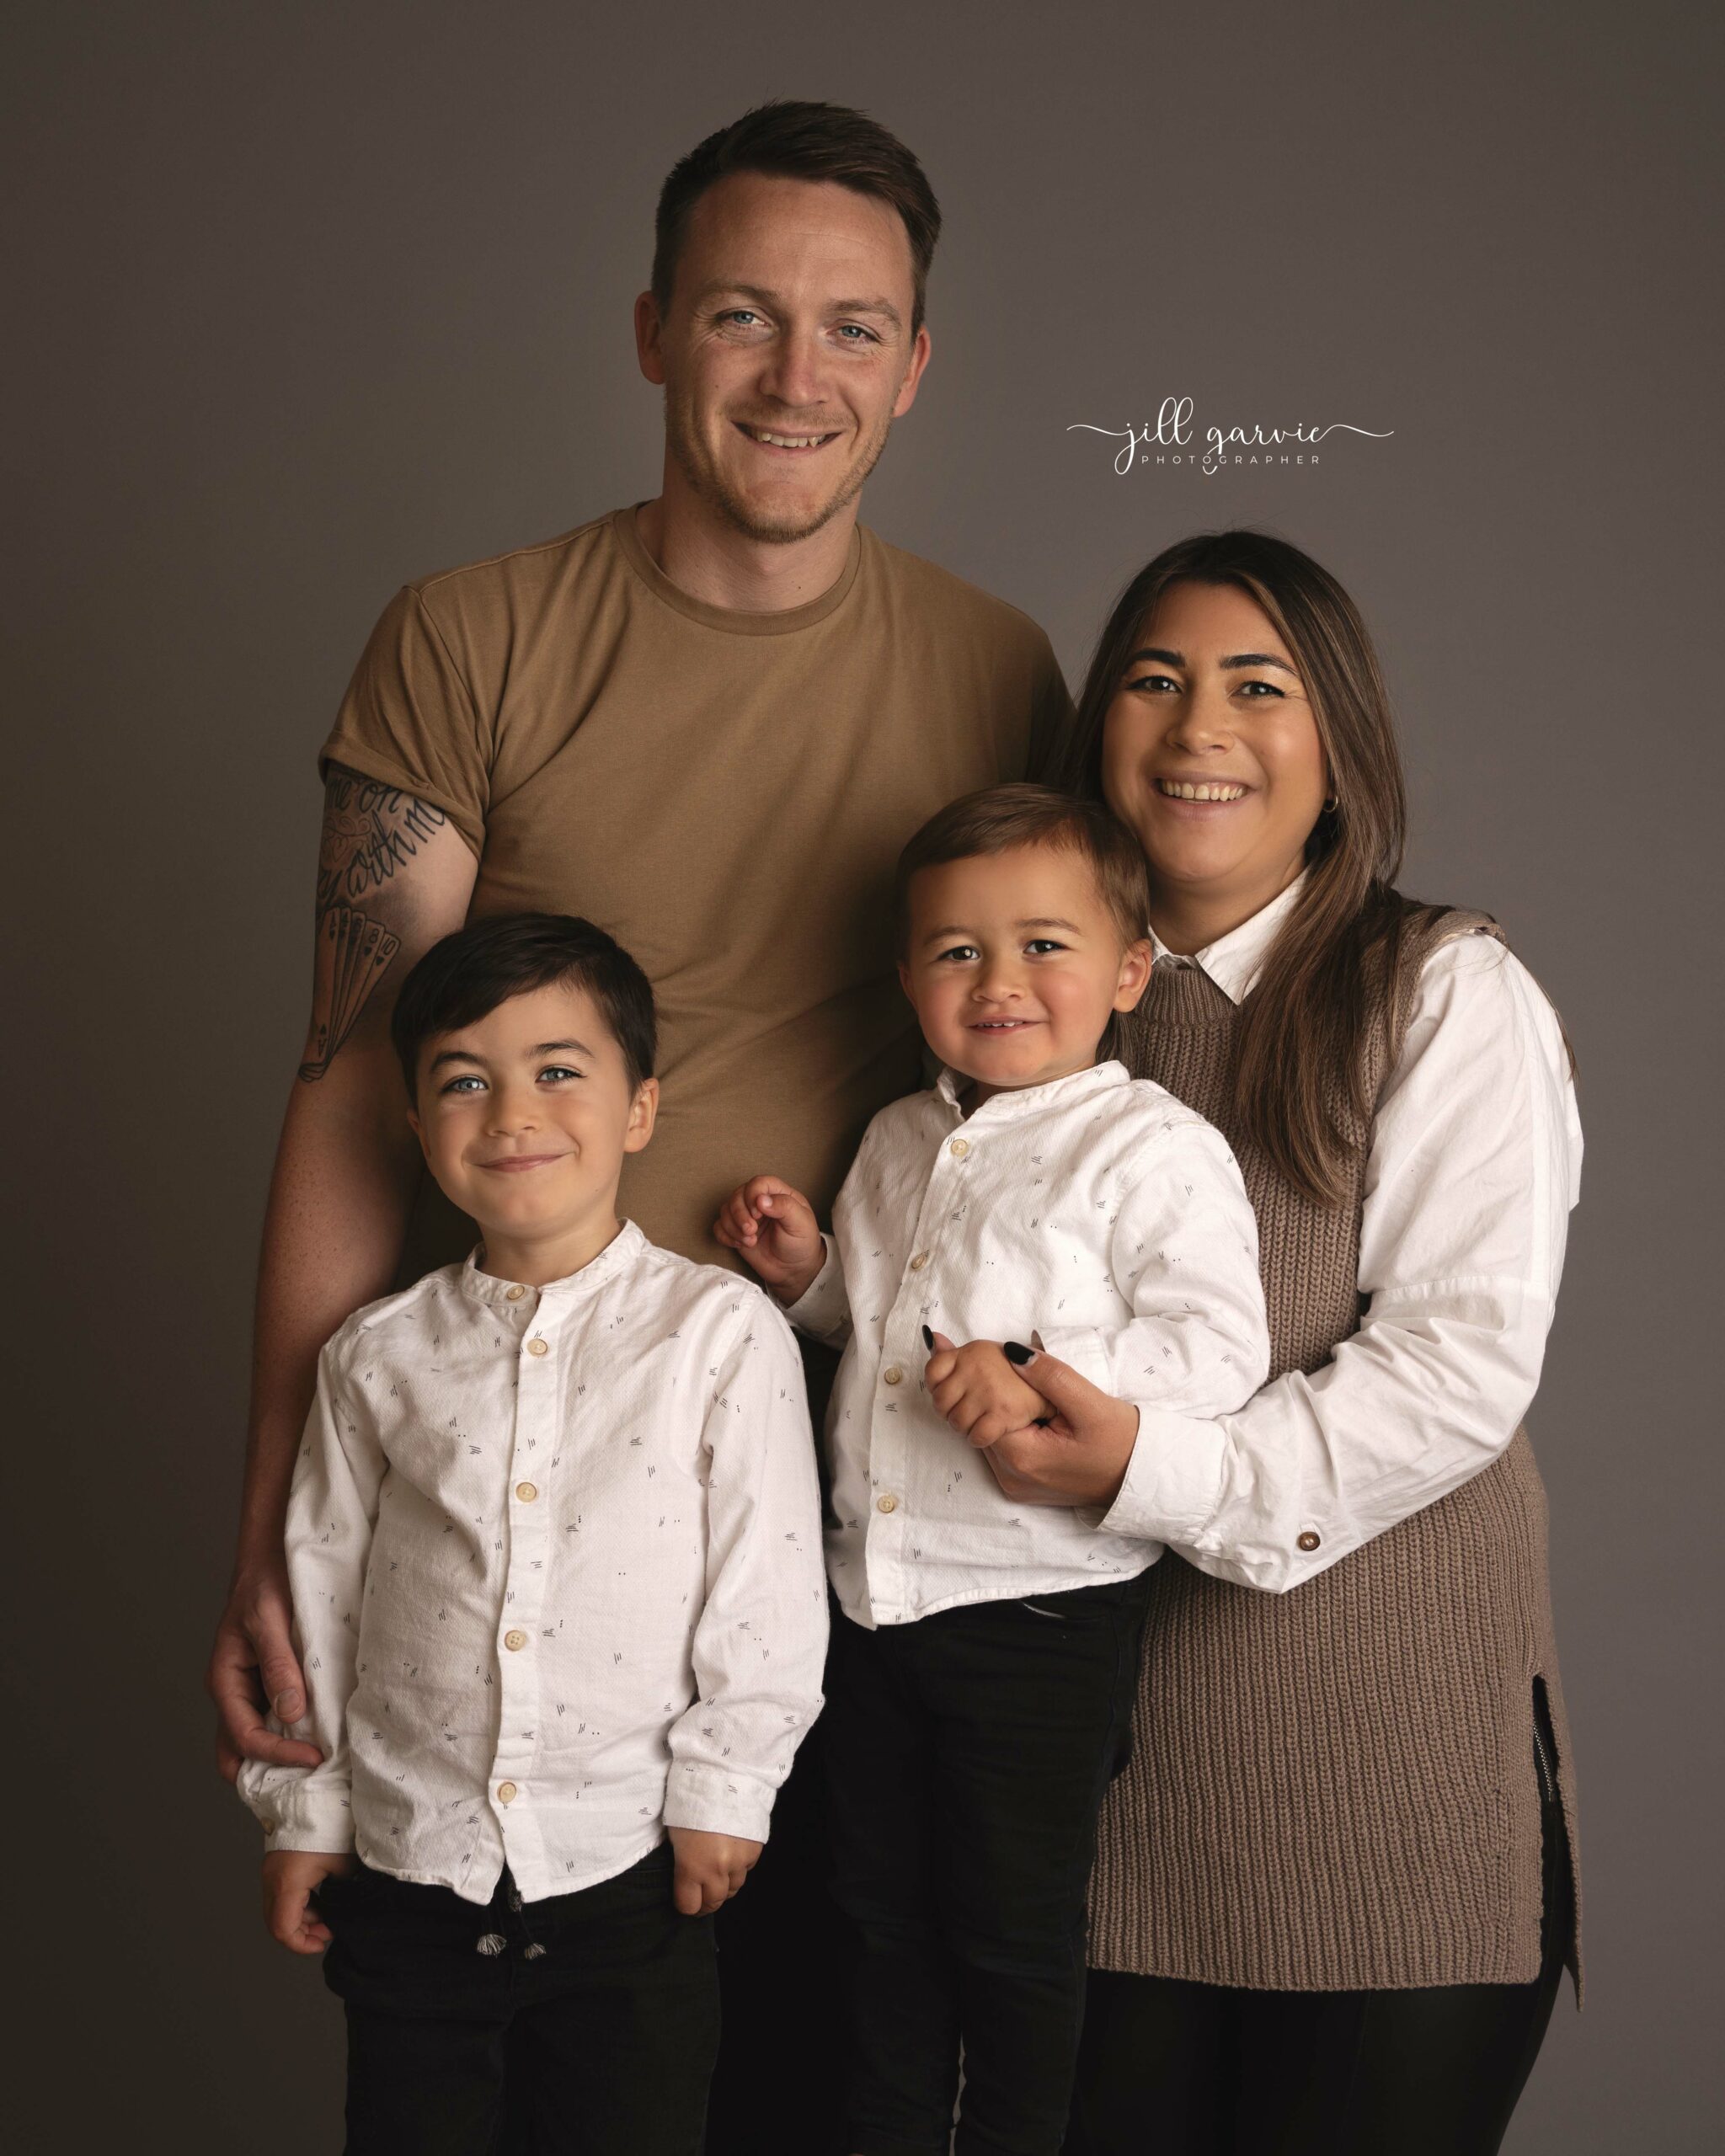 Photograph of family taken at Photoshoot